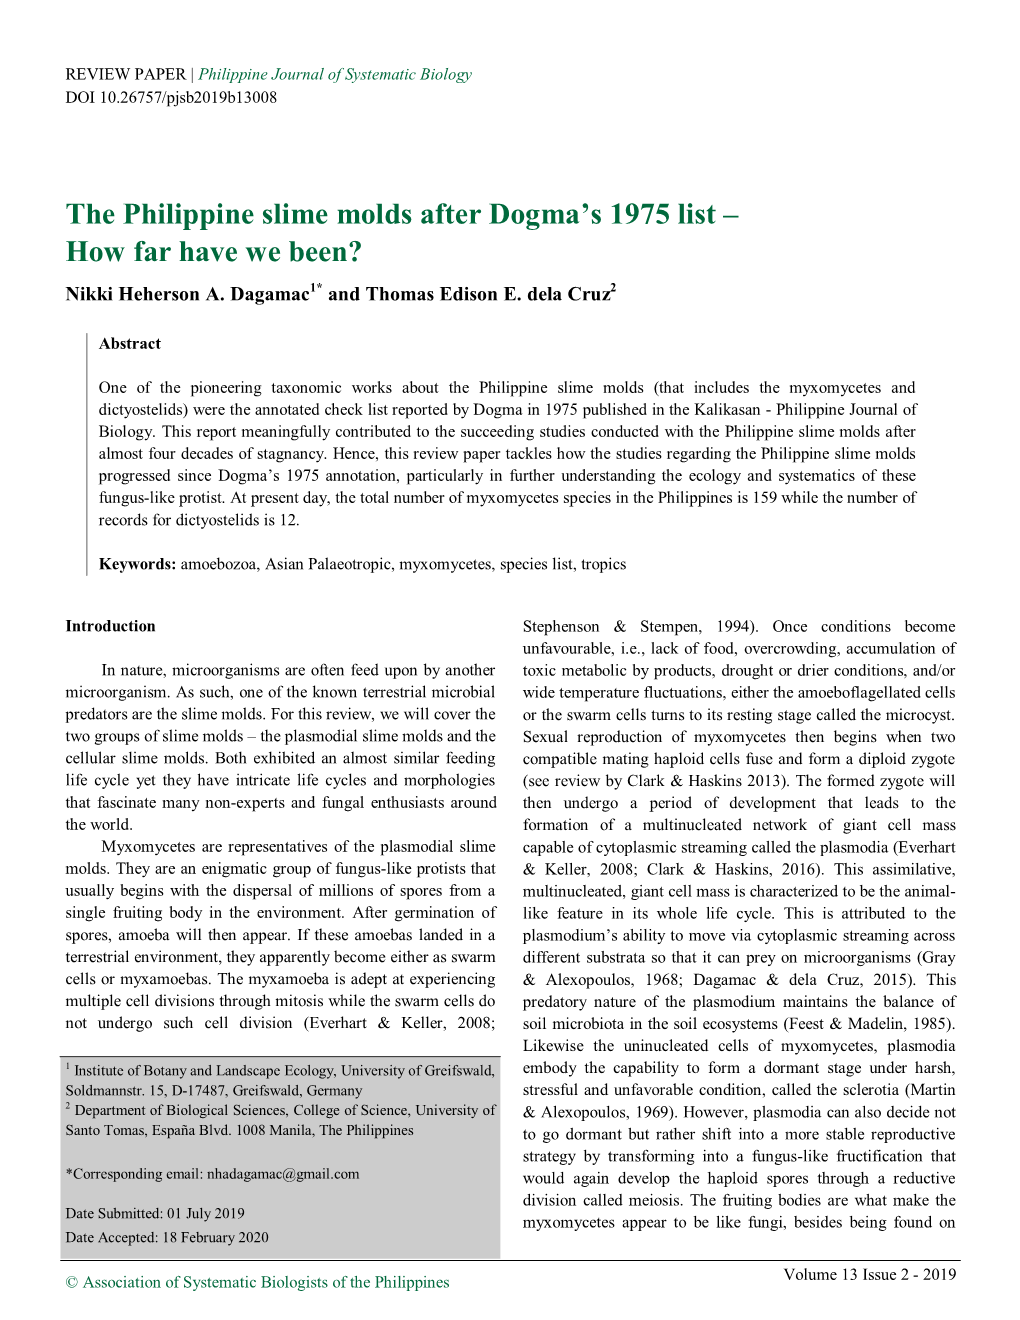 The Philippine Slime Molds After Dogma's 1975 List